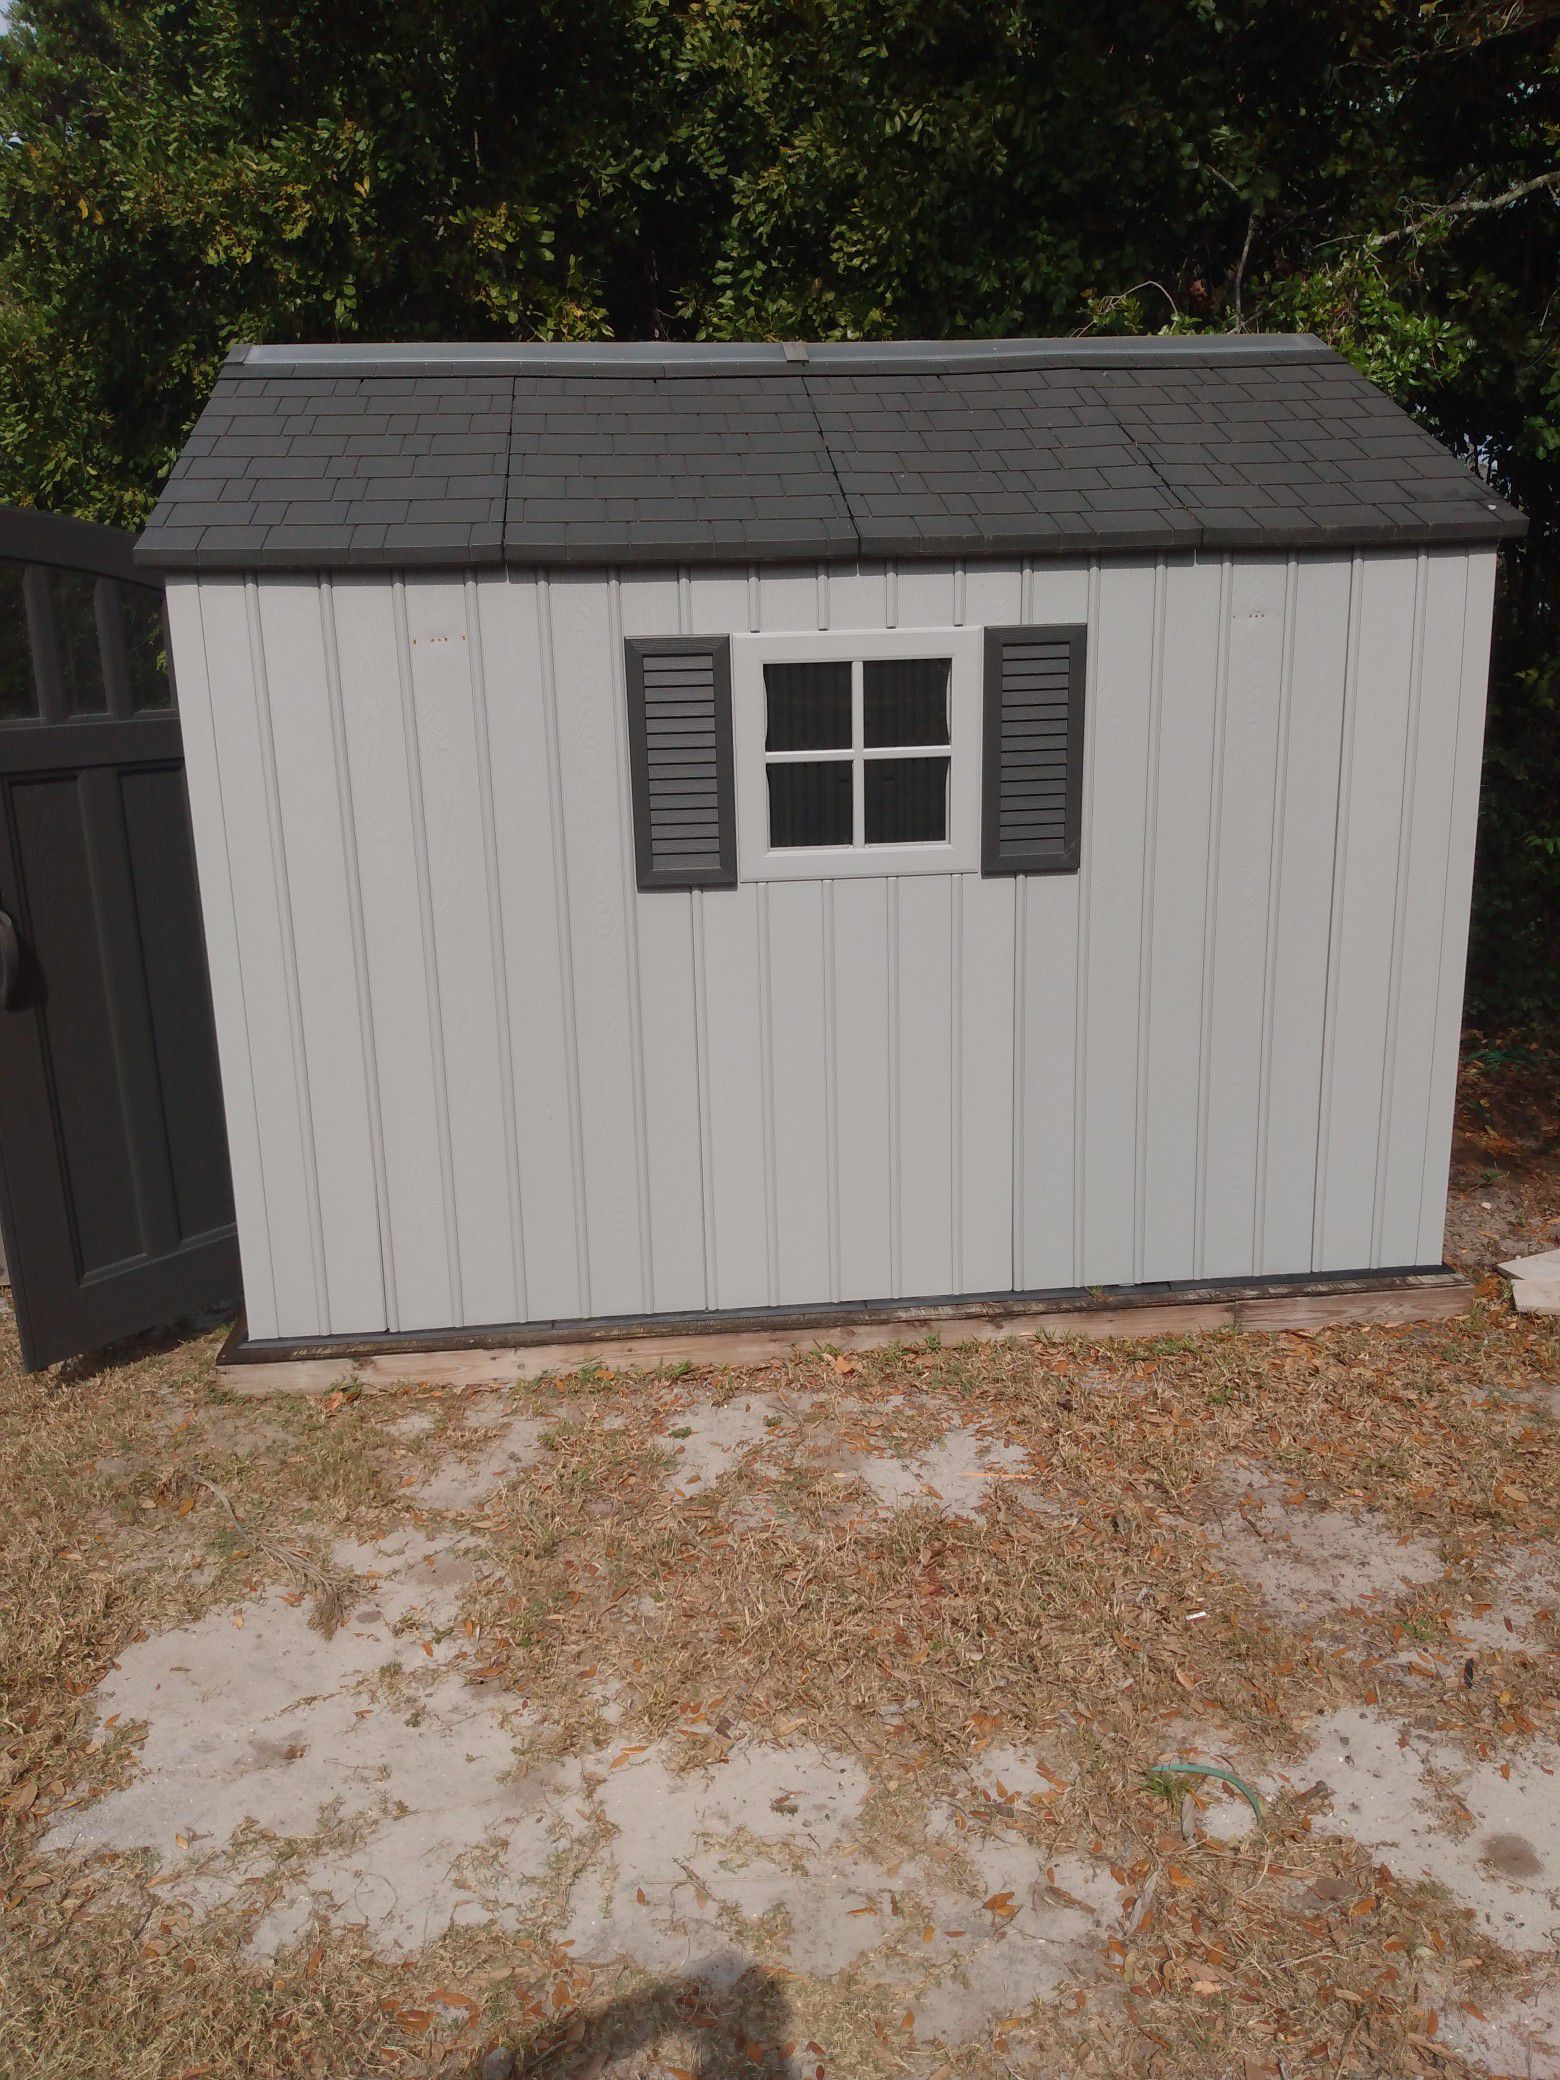 Plastic shed house $$450 and good conditions serious buyers only